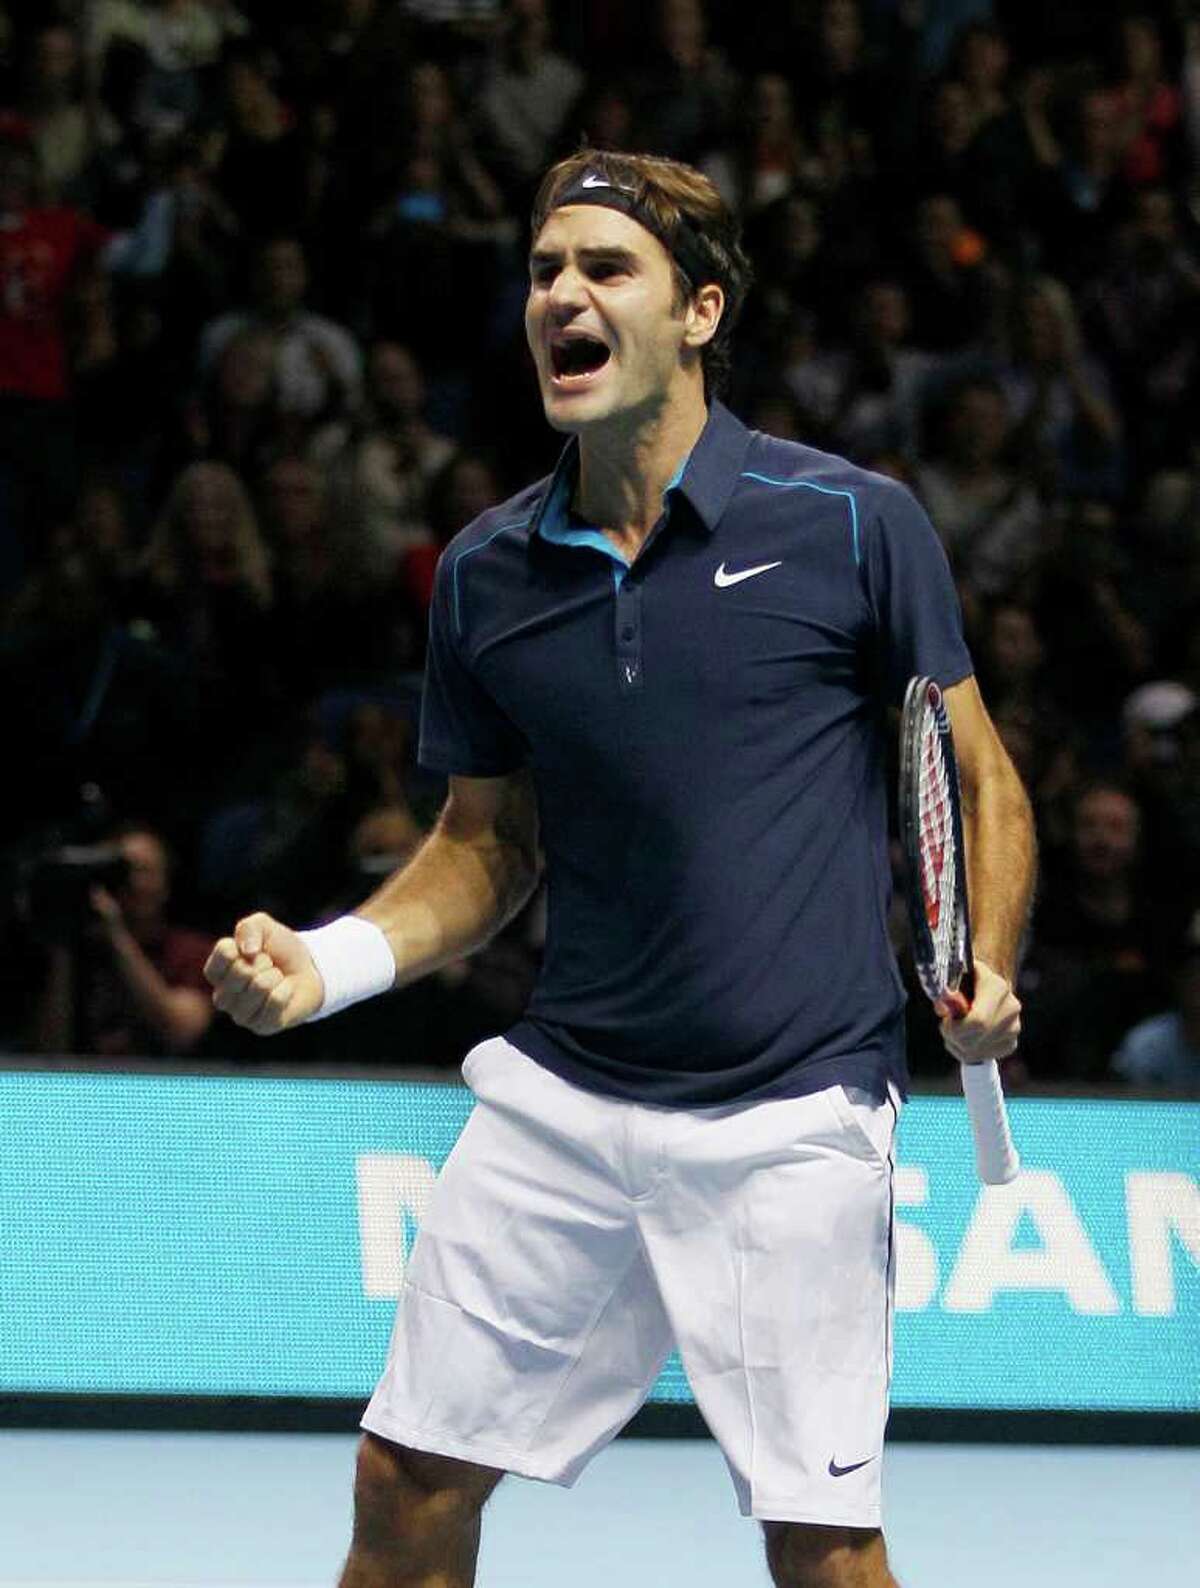 KIRSTY WIGGLESWORTH: ASSOCIATED PRESS DOWNS AND UPS: Roger Federer ends his year on a high note, even though it's his first without a Grand Slam since 2002.